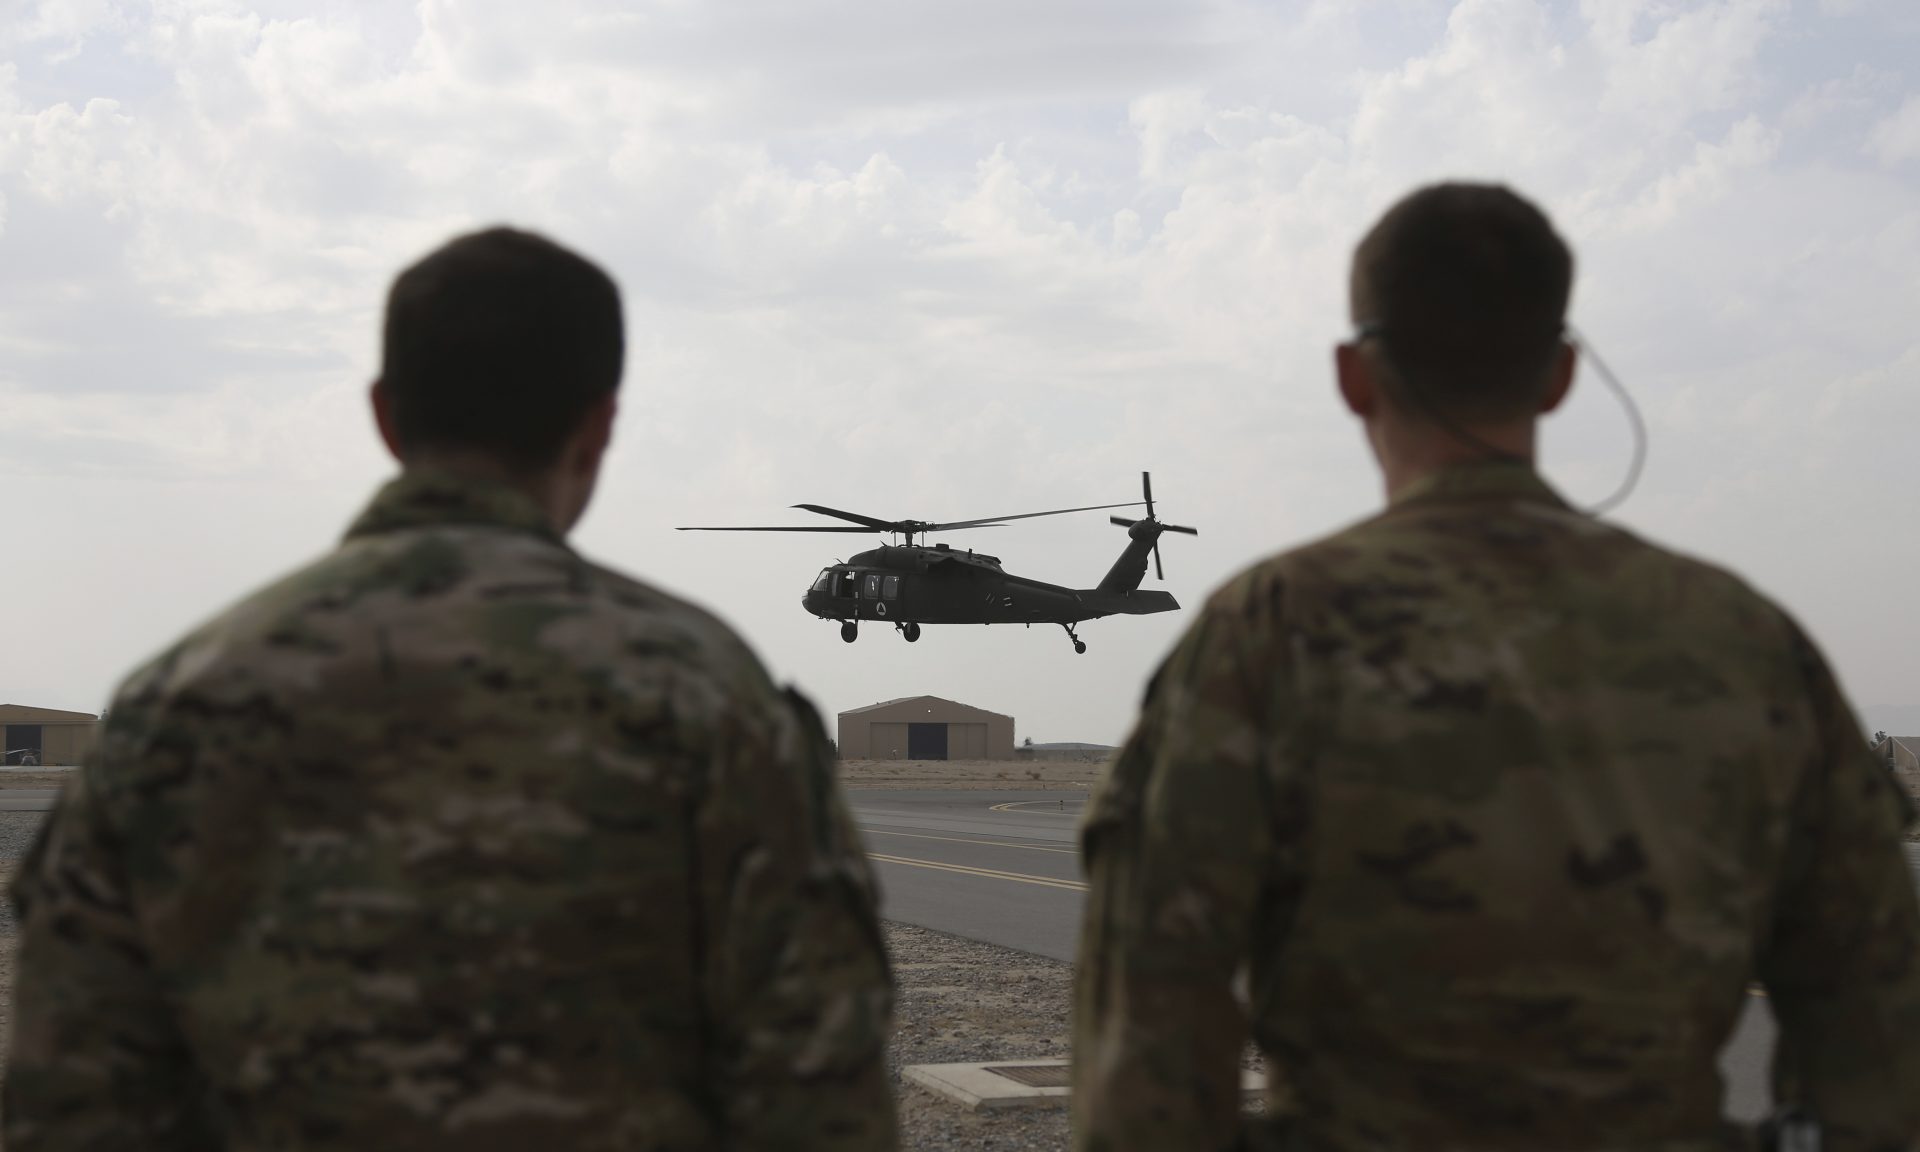 In this Monday, March 19, 2018 photo, a UH-60 Black Hawk helicopter carrying US advisers and Afghan trainees takes off at Kandahar Air Field, Afghanistan. The U.S. military has been flying UH-60 Black Hawk helicopter missions in Afghanistan for years, but the storied aircraft will soon take to the country’s battlefields manned by pilots and crews from the Afghan military.